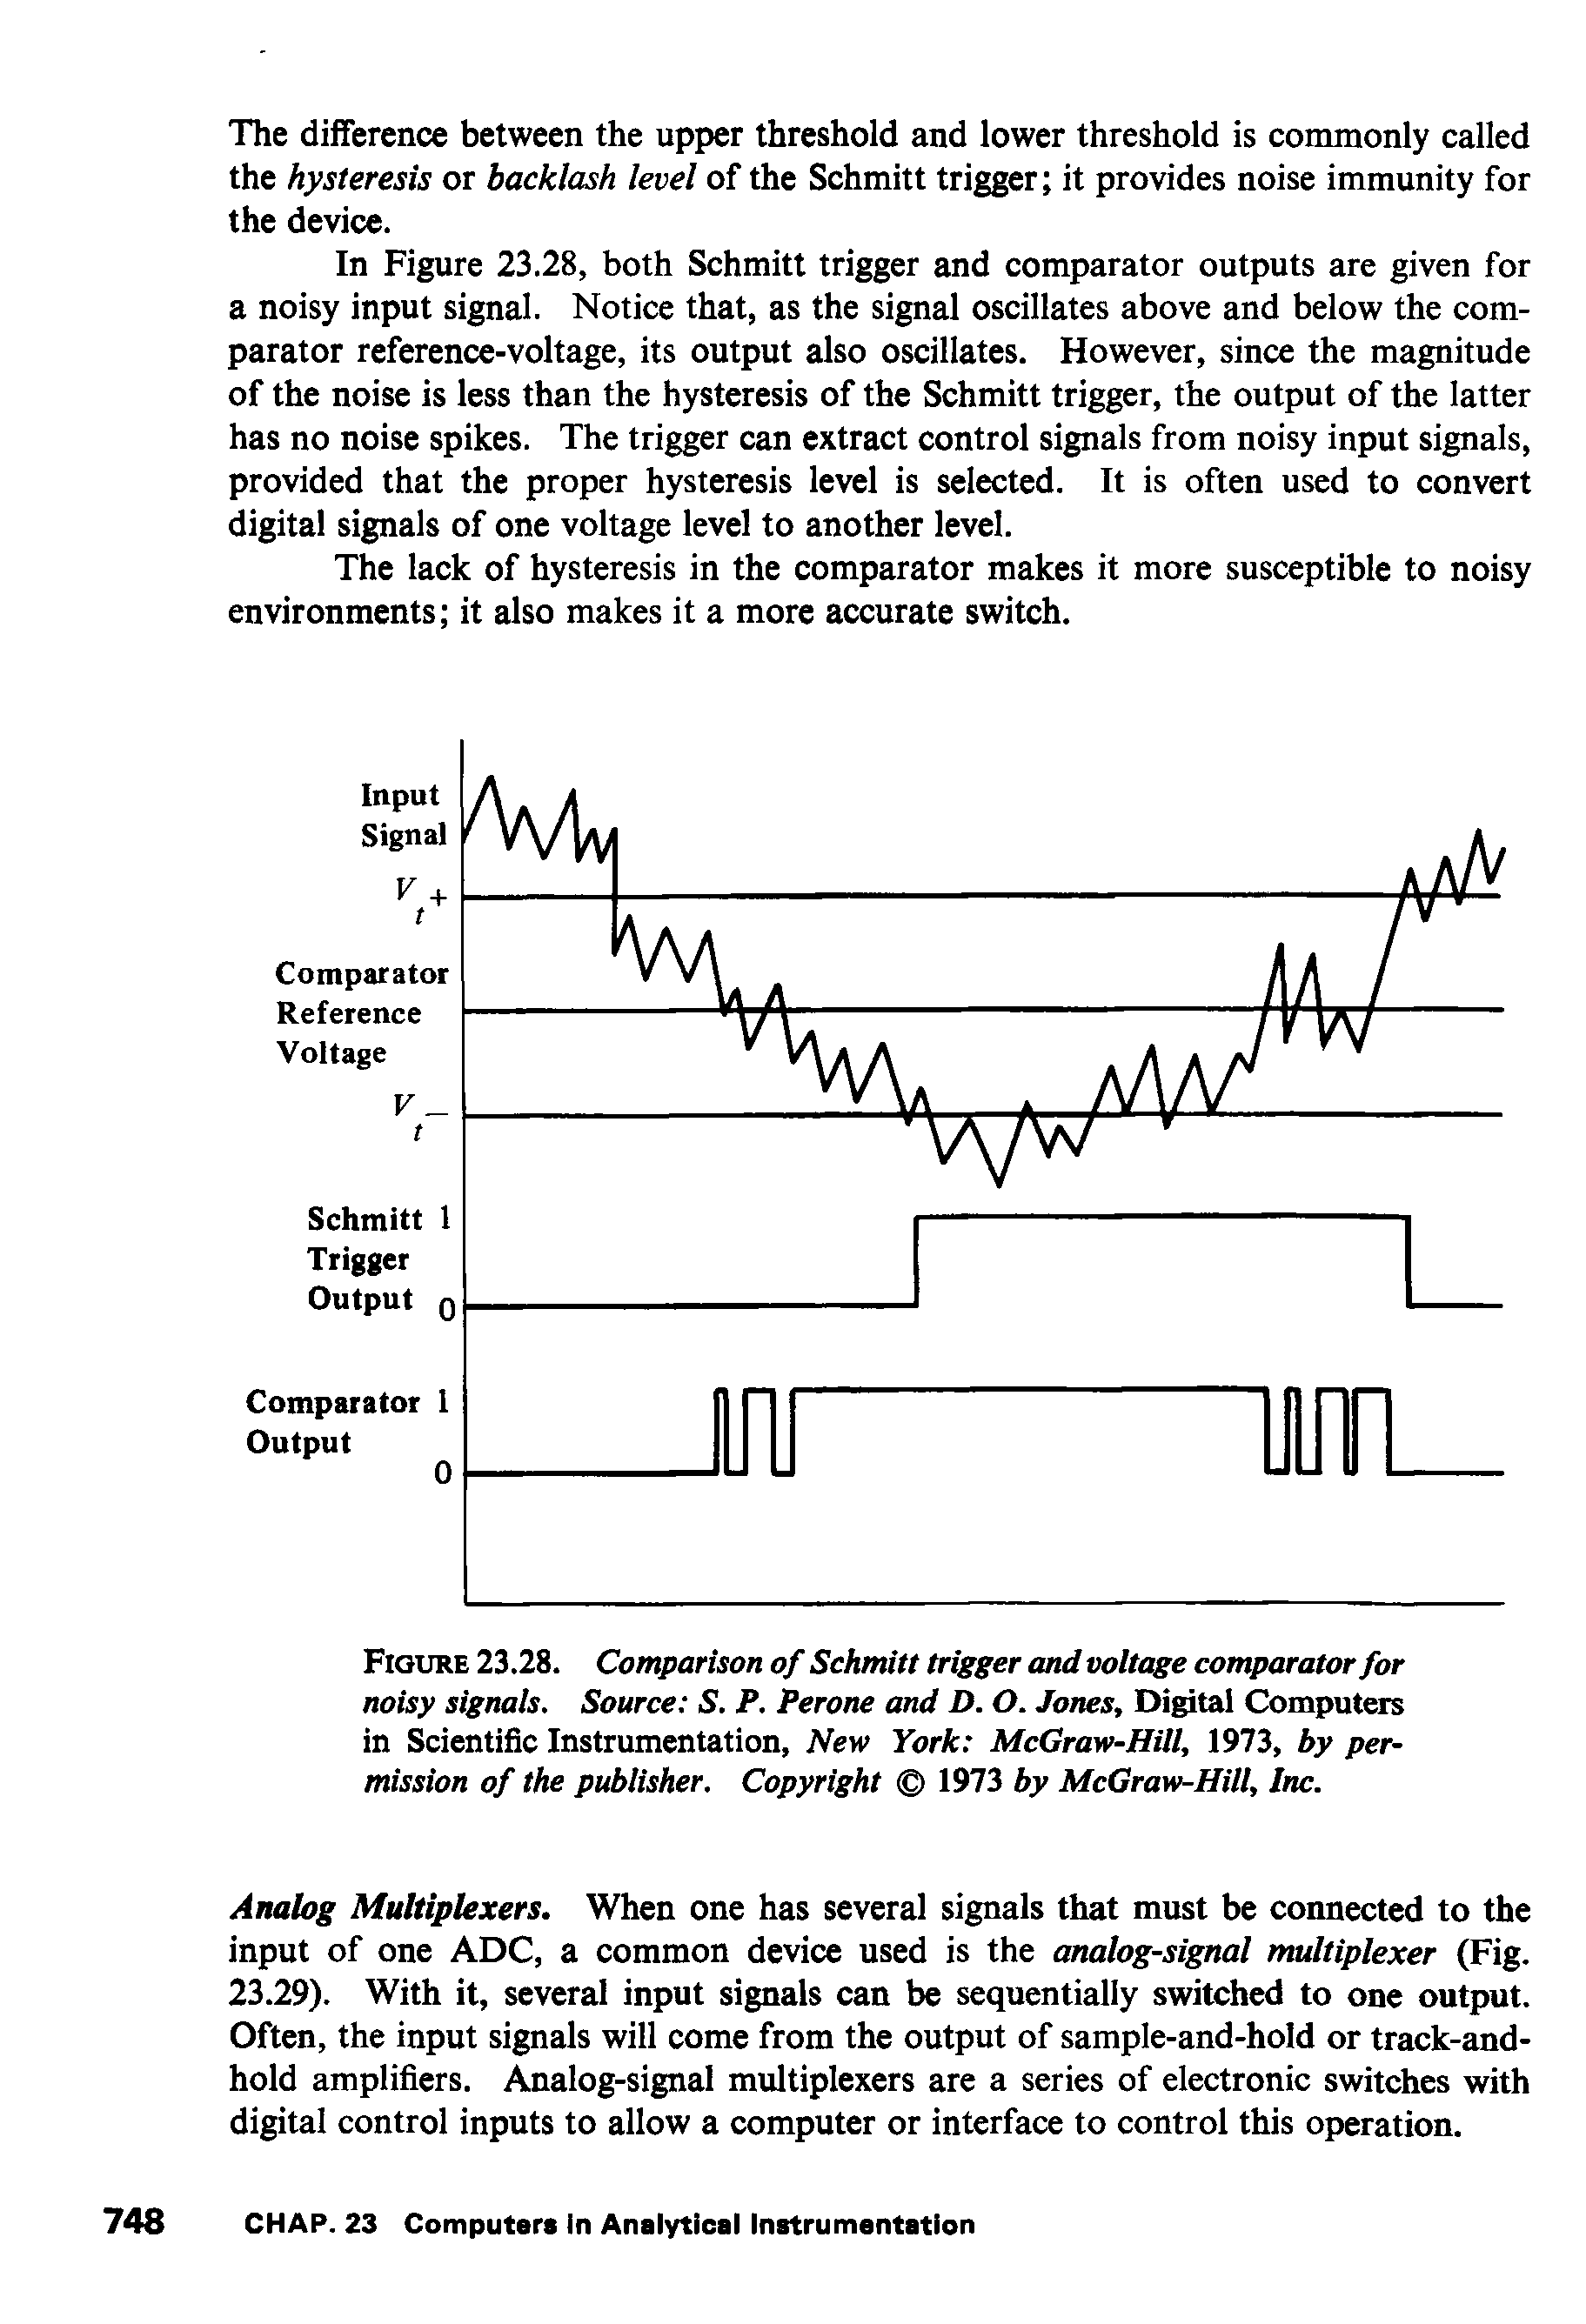 Figure 23.28. Comparison of Schmitt trigger and voltage comparator for noisy signals. Source S. P. Perone and D. O. Jones, Digital Computers in Scientific Instrumentation, New York McGraw-Hill, 1973, by permission of the publisher. Copyright 1973 by McGraw-Hill, Inc.